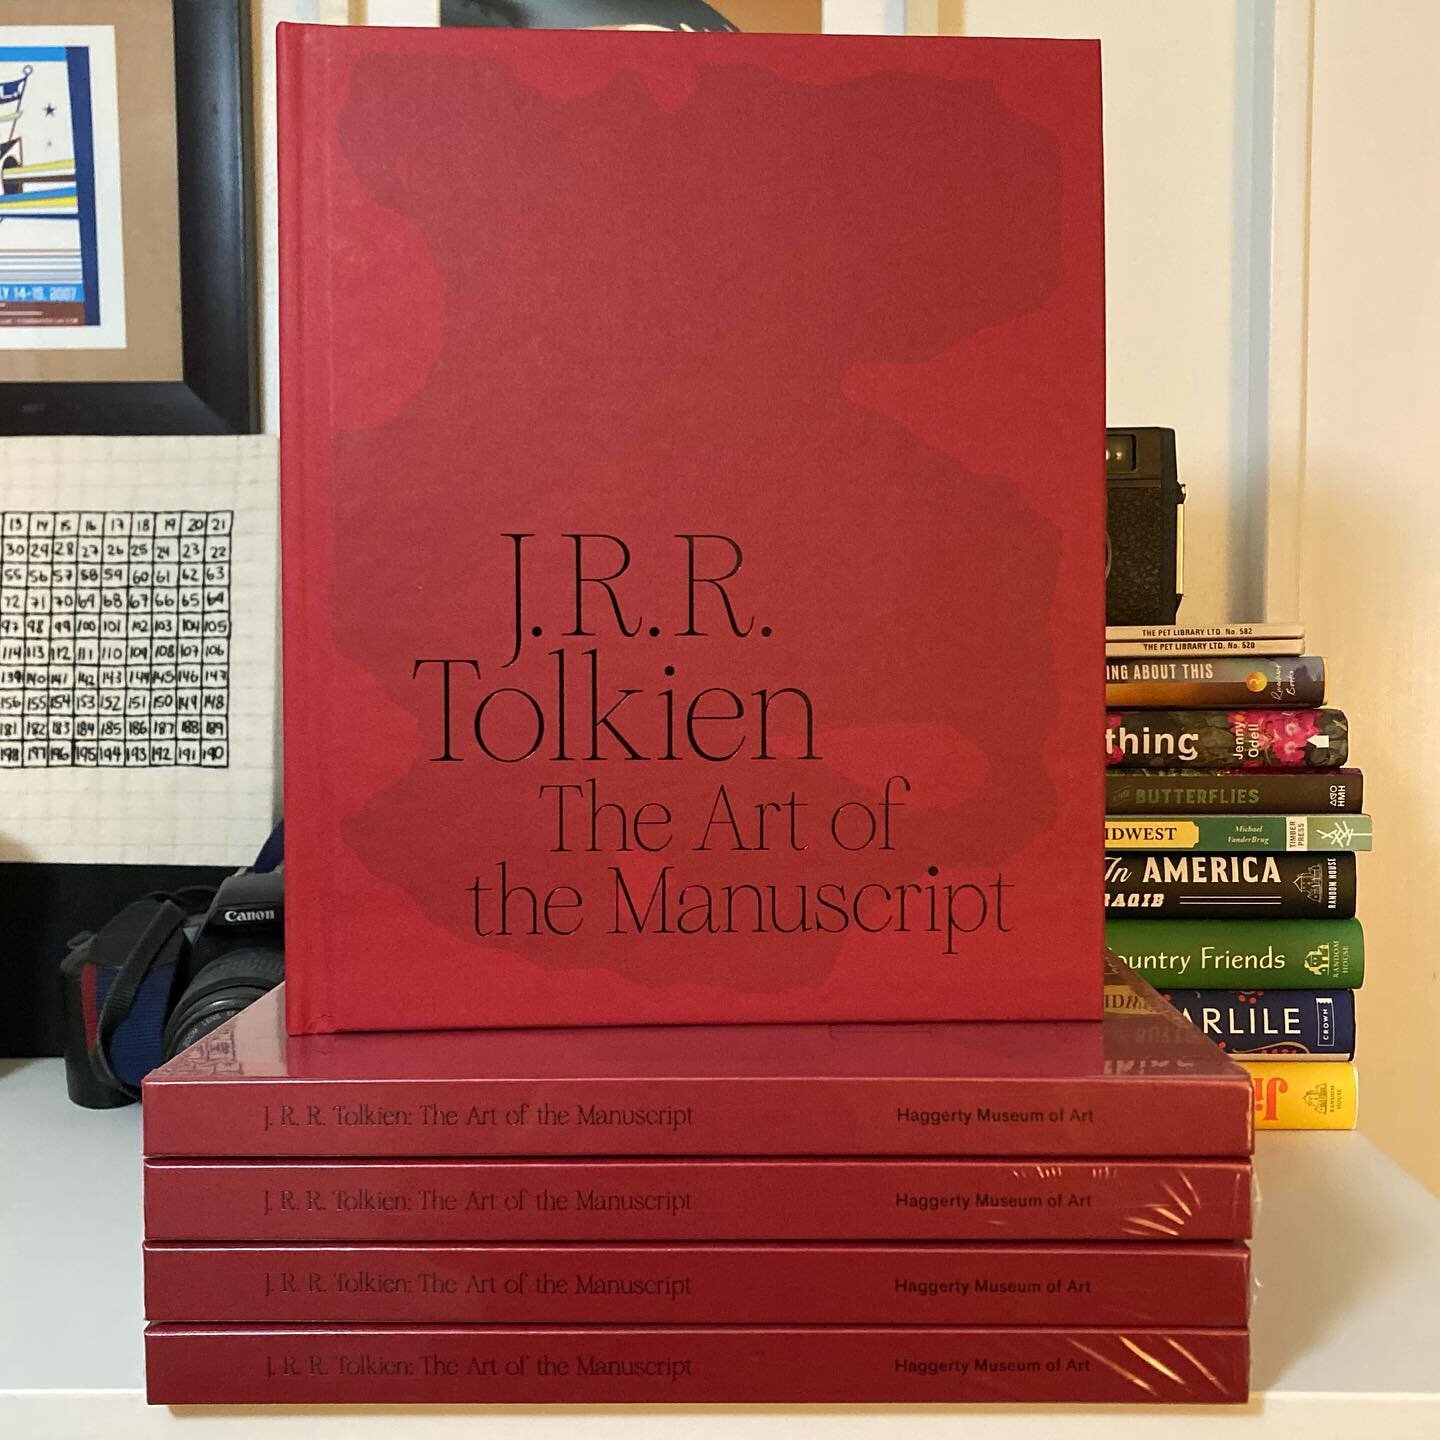 Closing out my first year captaining my own ship as a freelancer &mdash; I want to highlight one of the wildest projects I worked on: the catalogue for the J. R. R. Tolkien exhibition at the @haggertymuseum. 

A surreal opportunity to work with mater